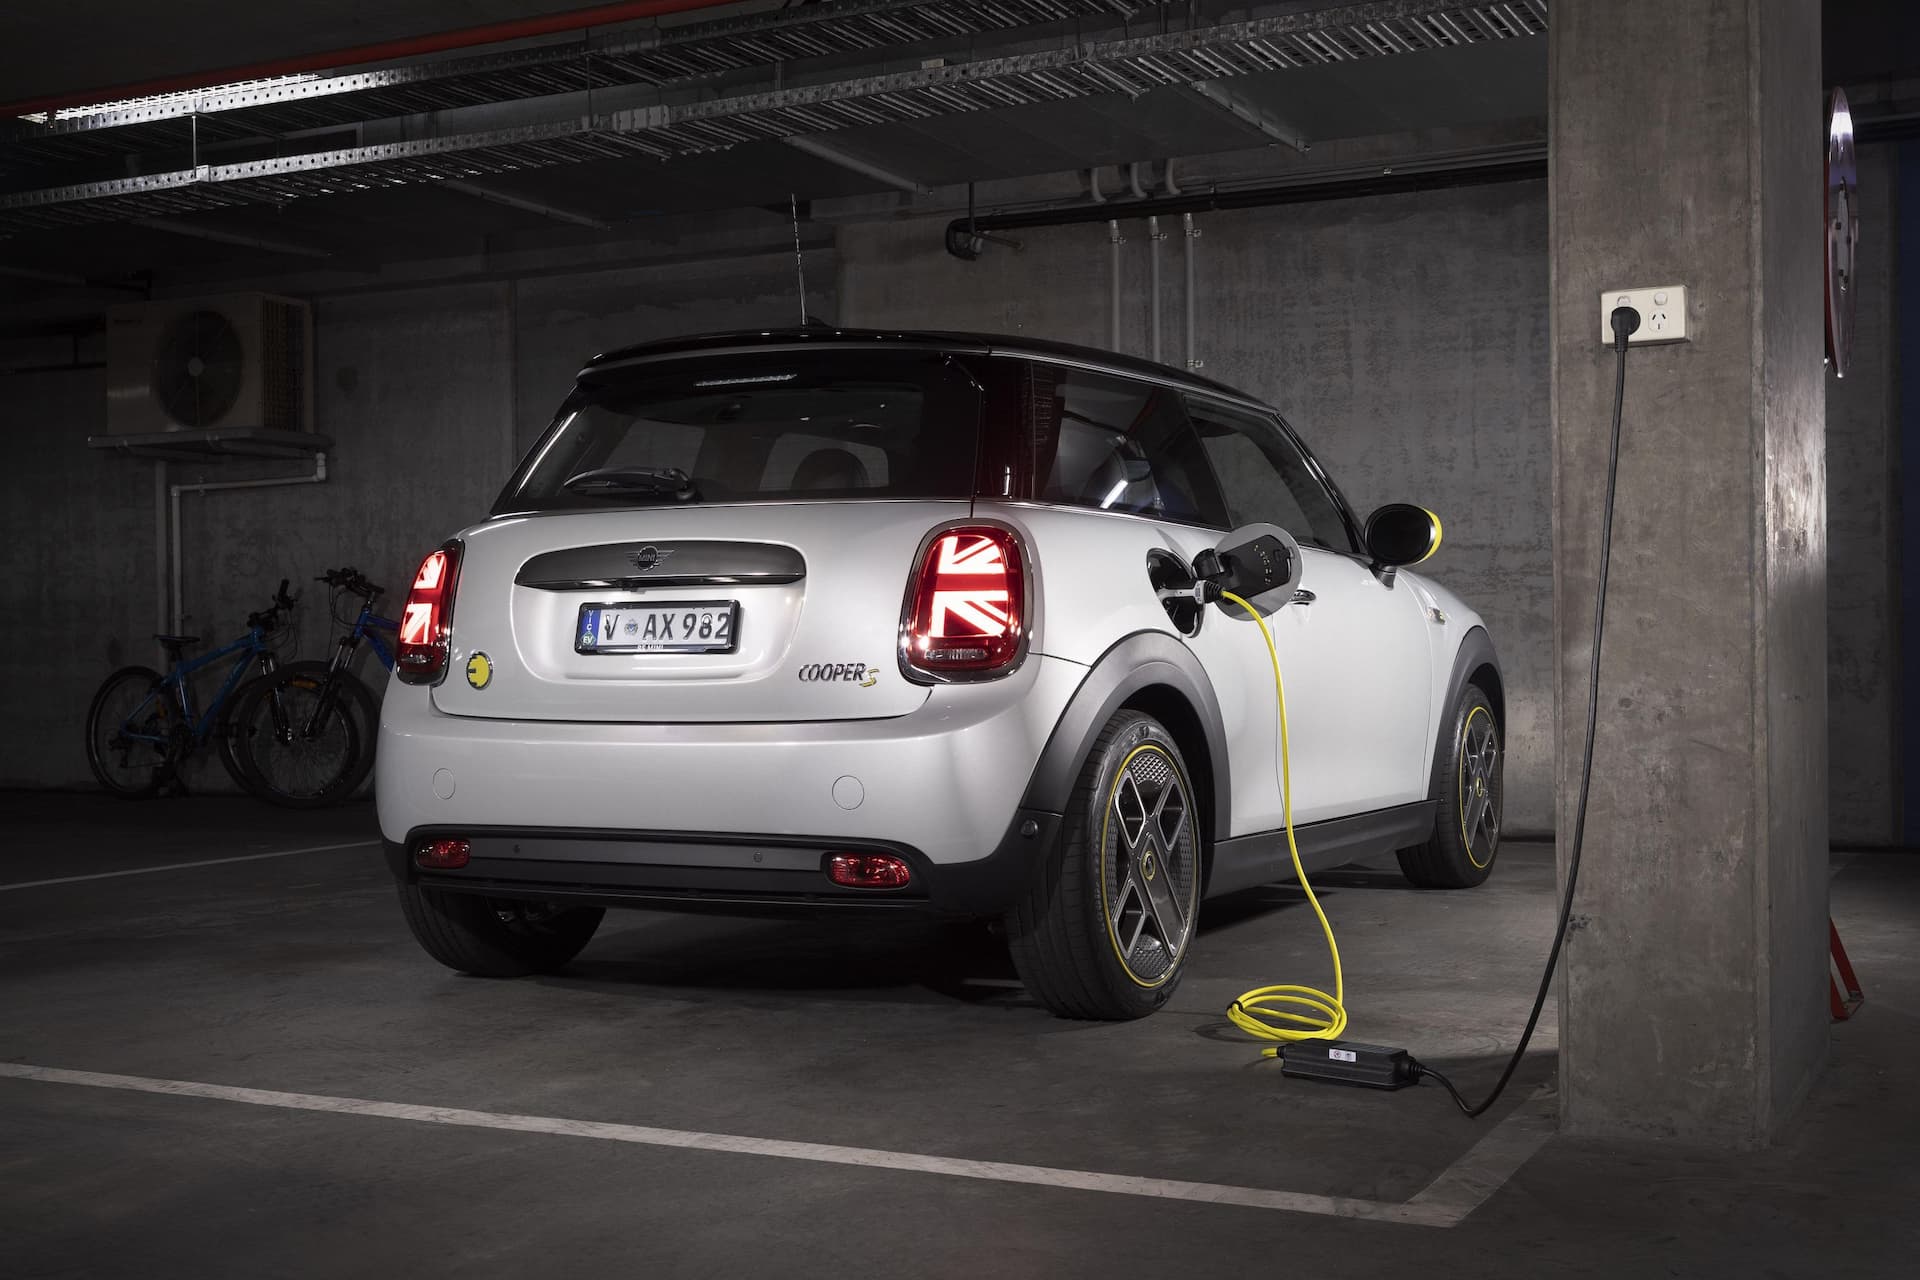 Mini Cooper Electric charging from domestic powerpoint in apartment basement